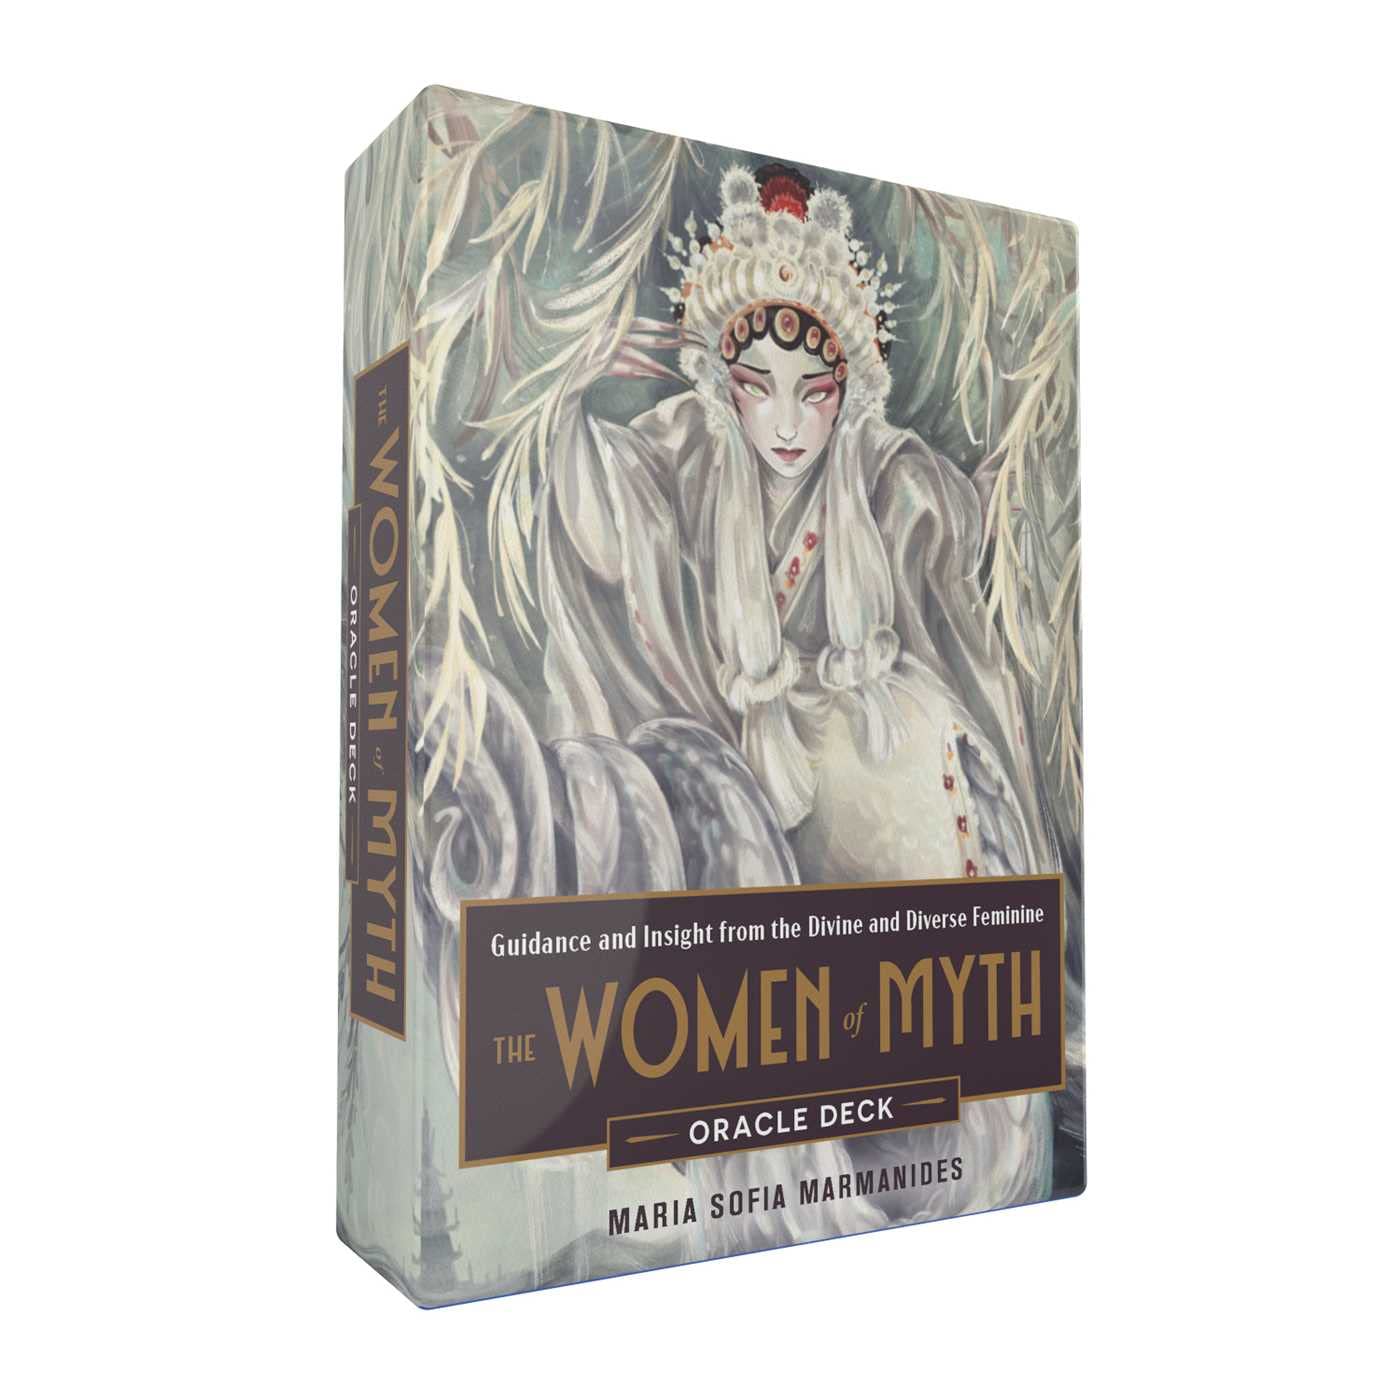 The Women of Myth Oracle